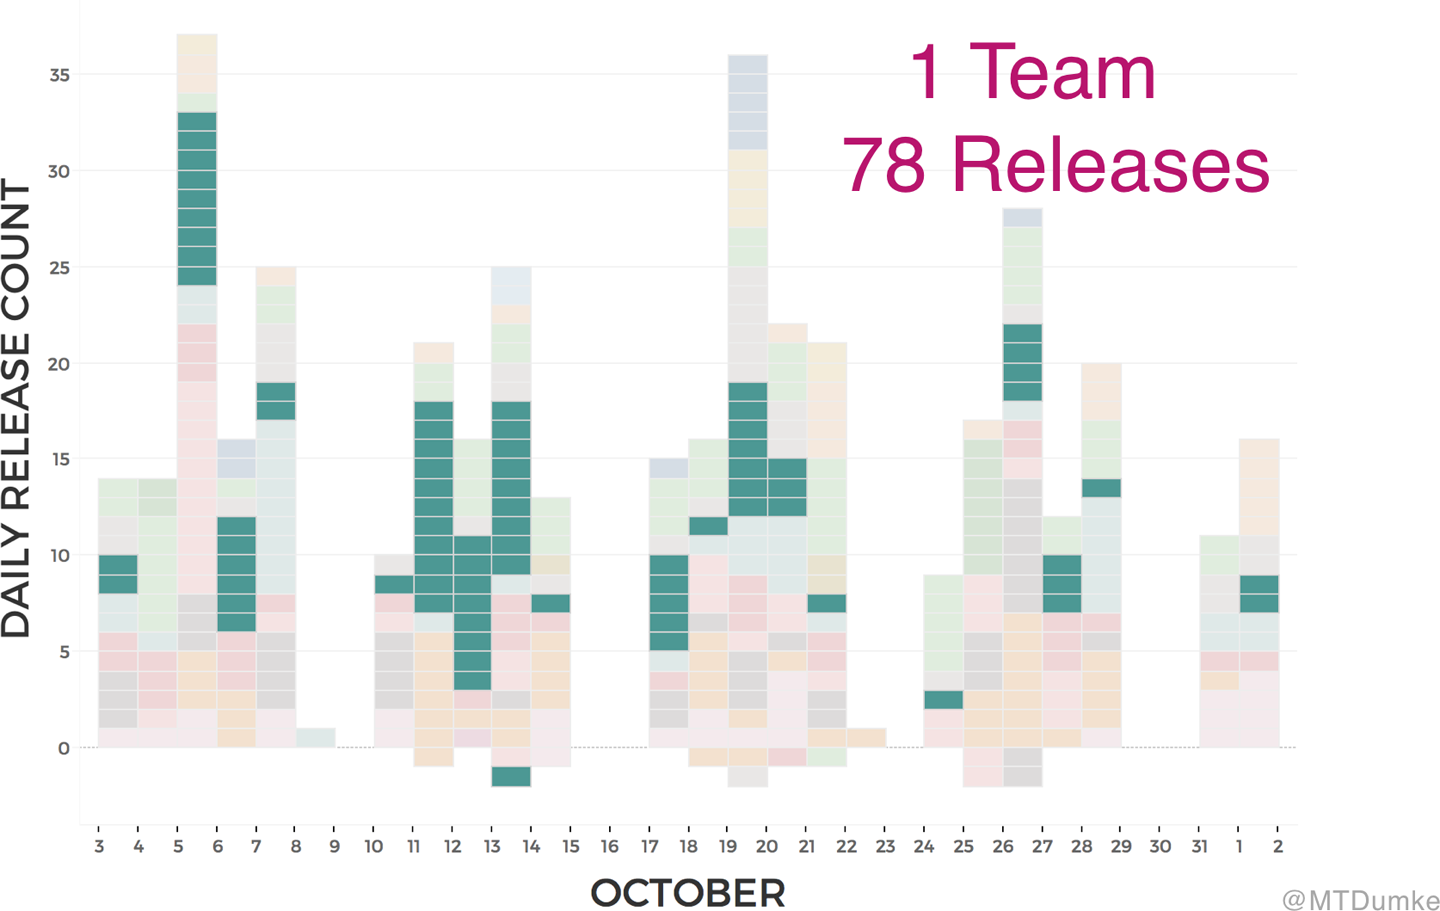 One team’s worth of releases from October 2016.